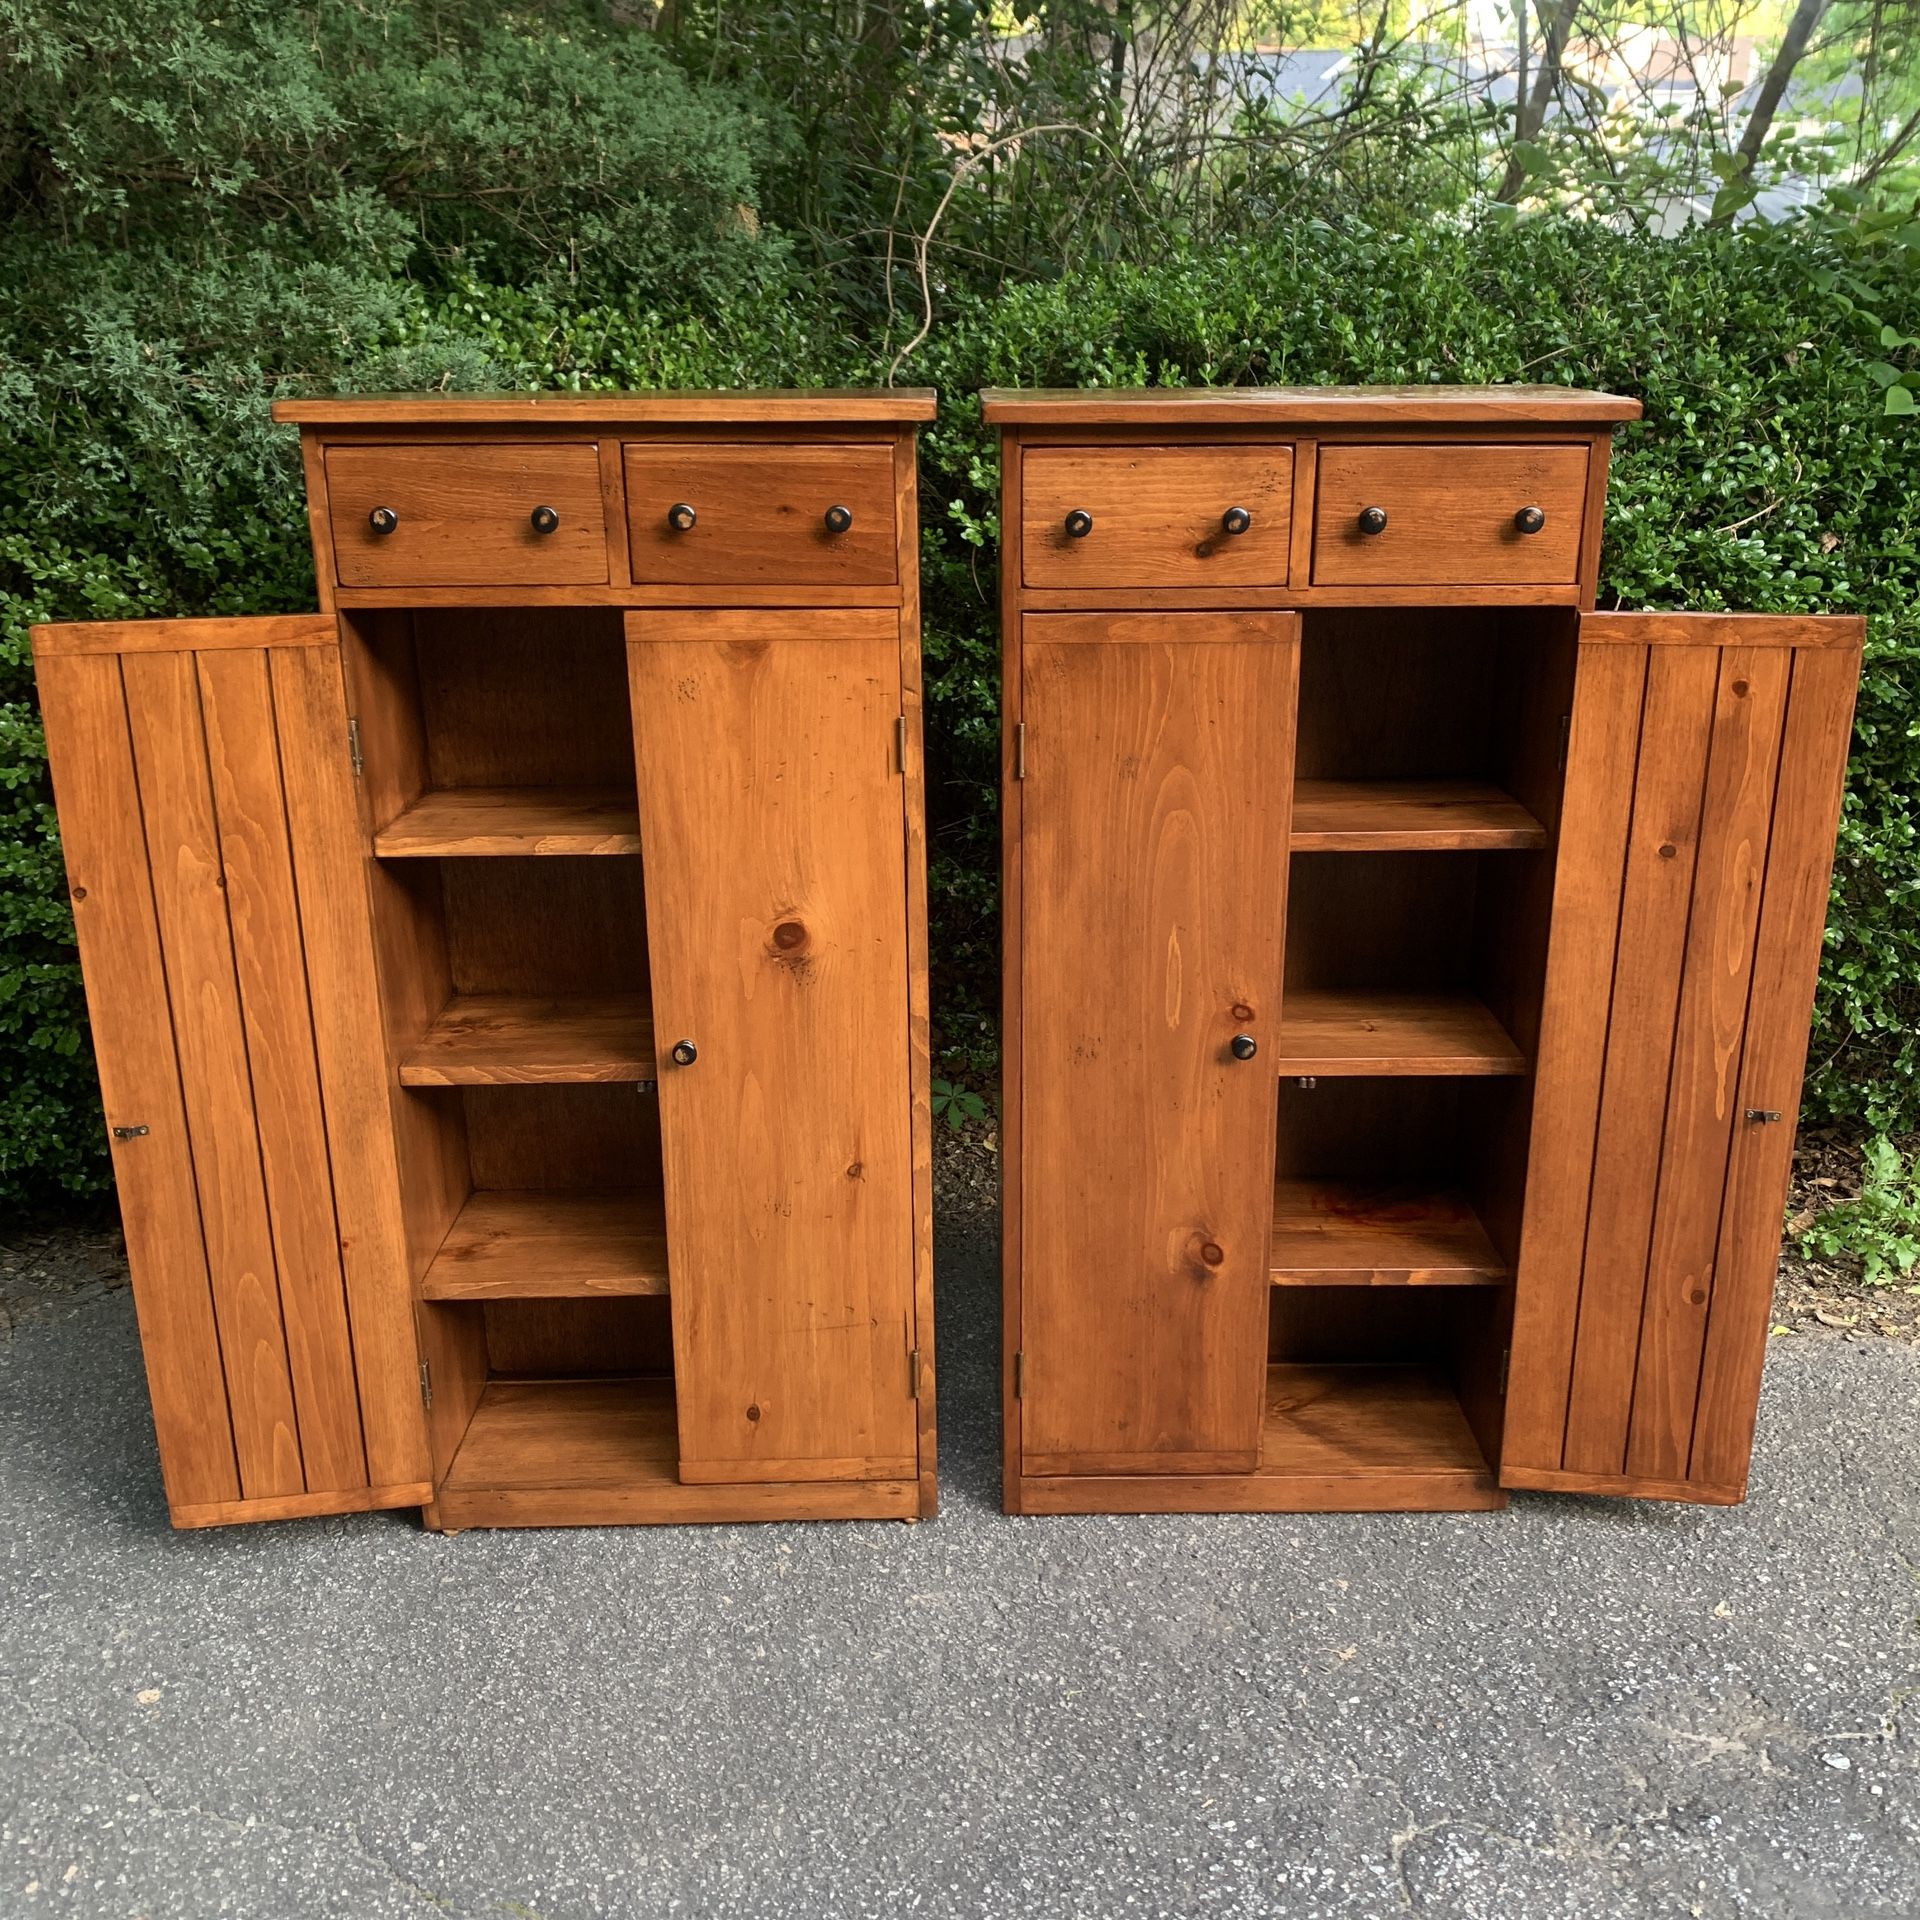 Pair of 46" Solid Wood Storage Cabinets - $100/each or both for $175